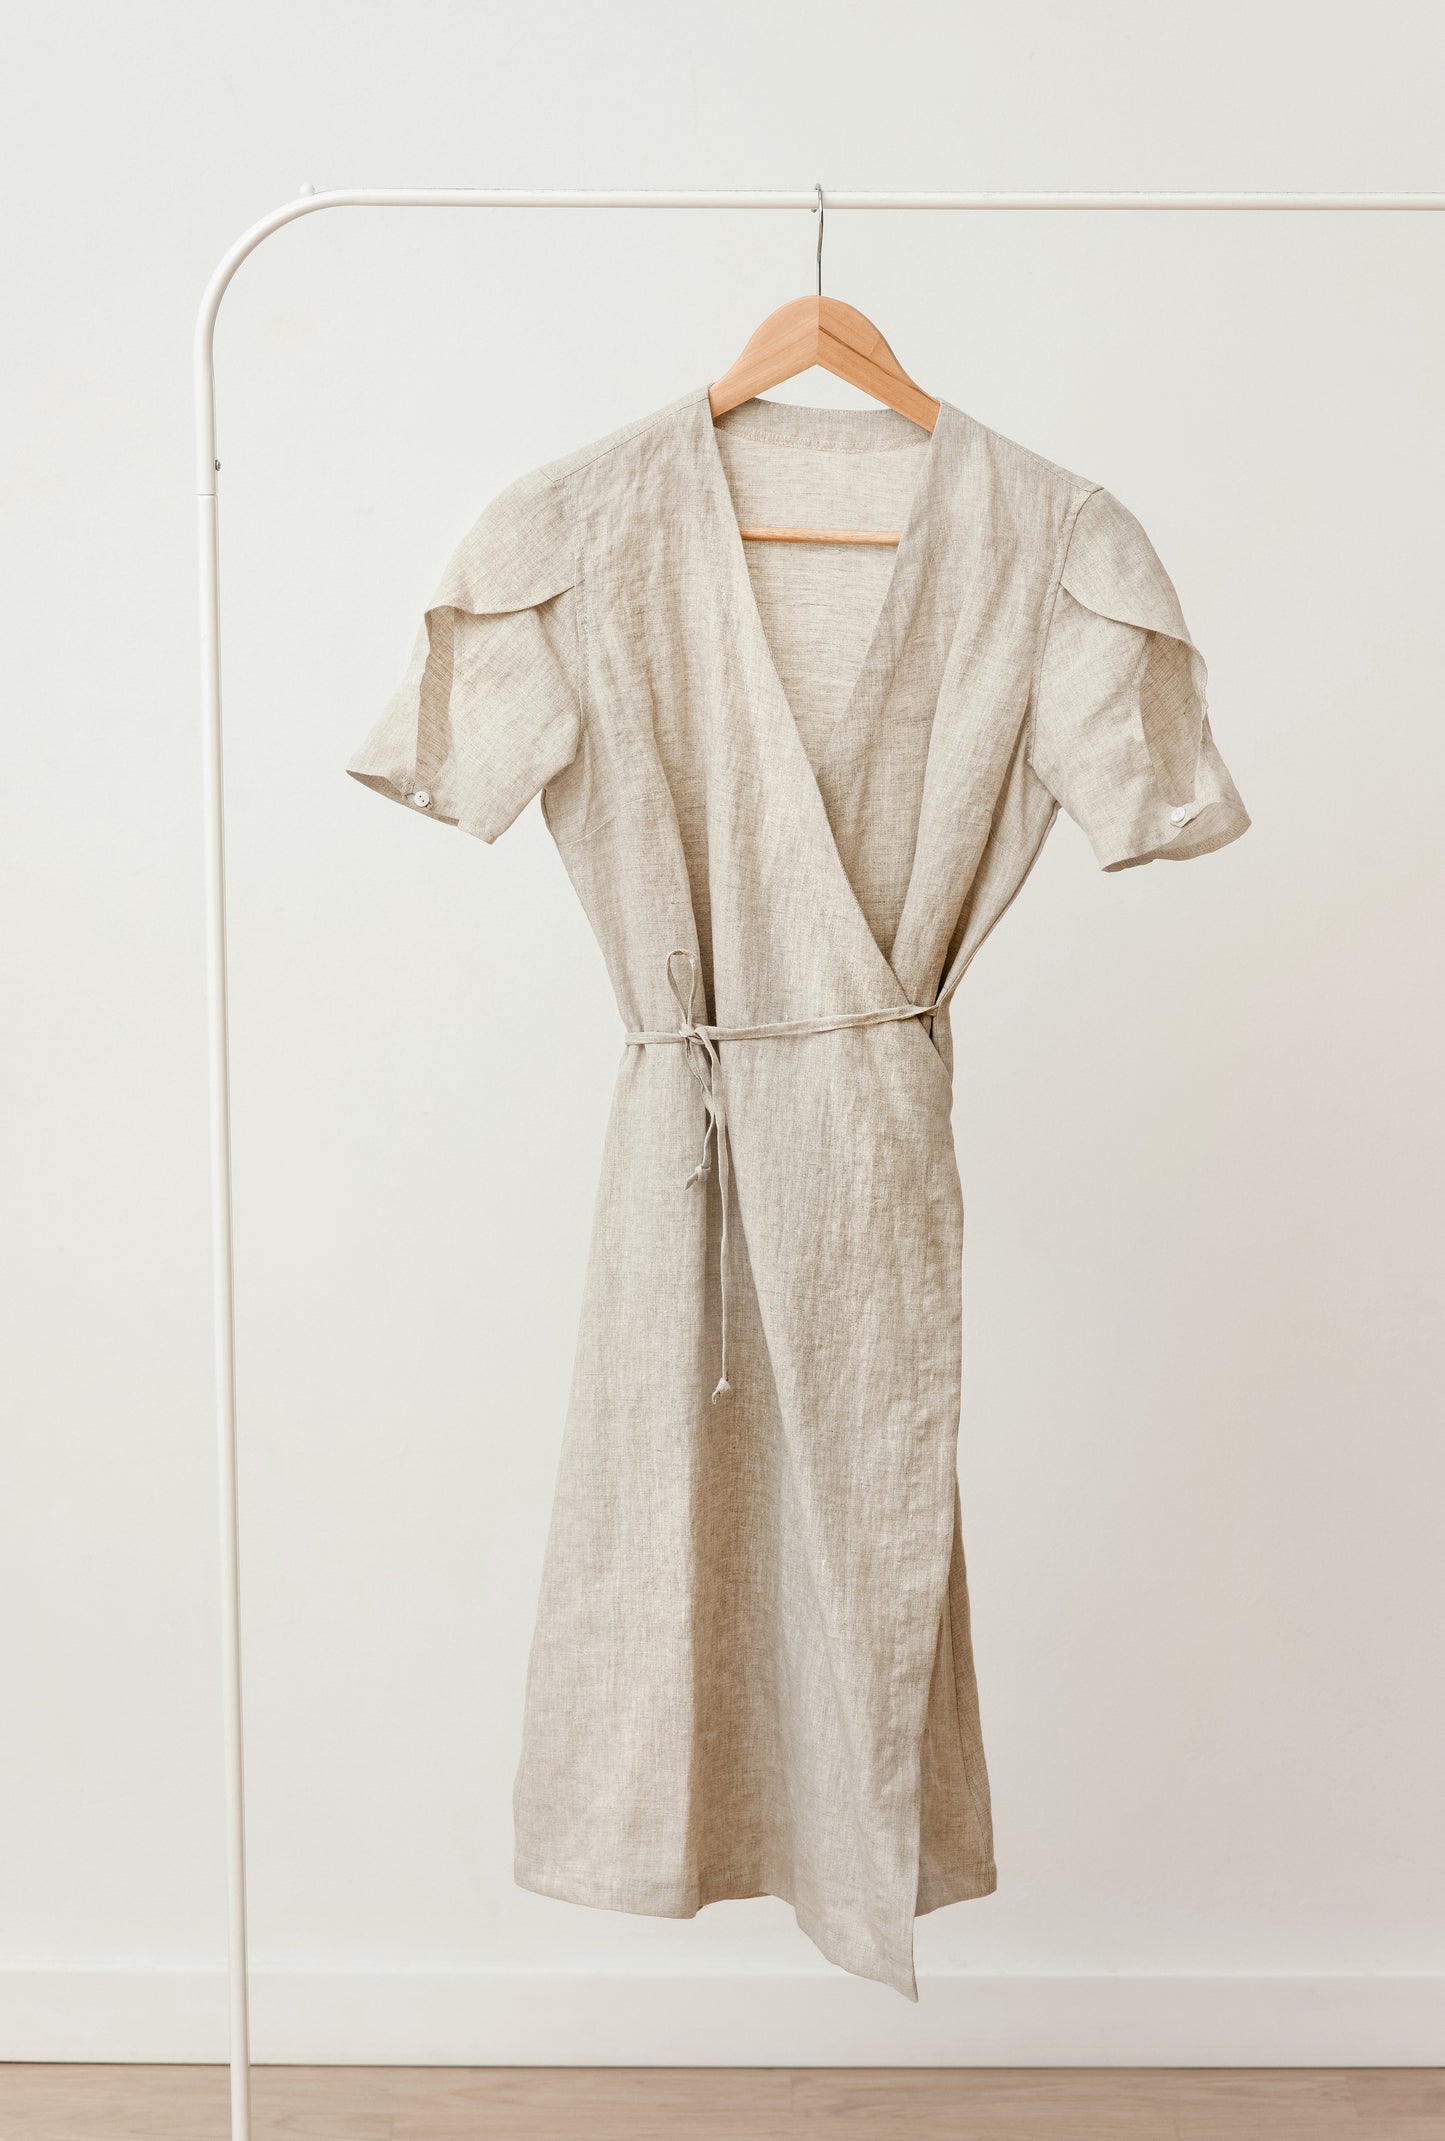 Linen dress with decorative sleeves